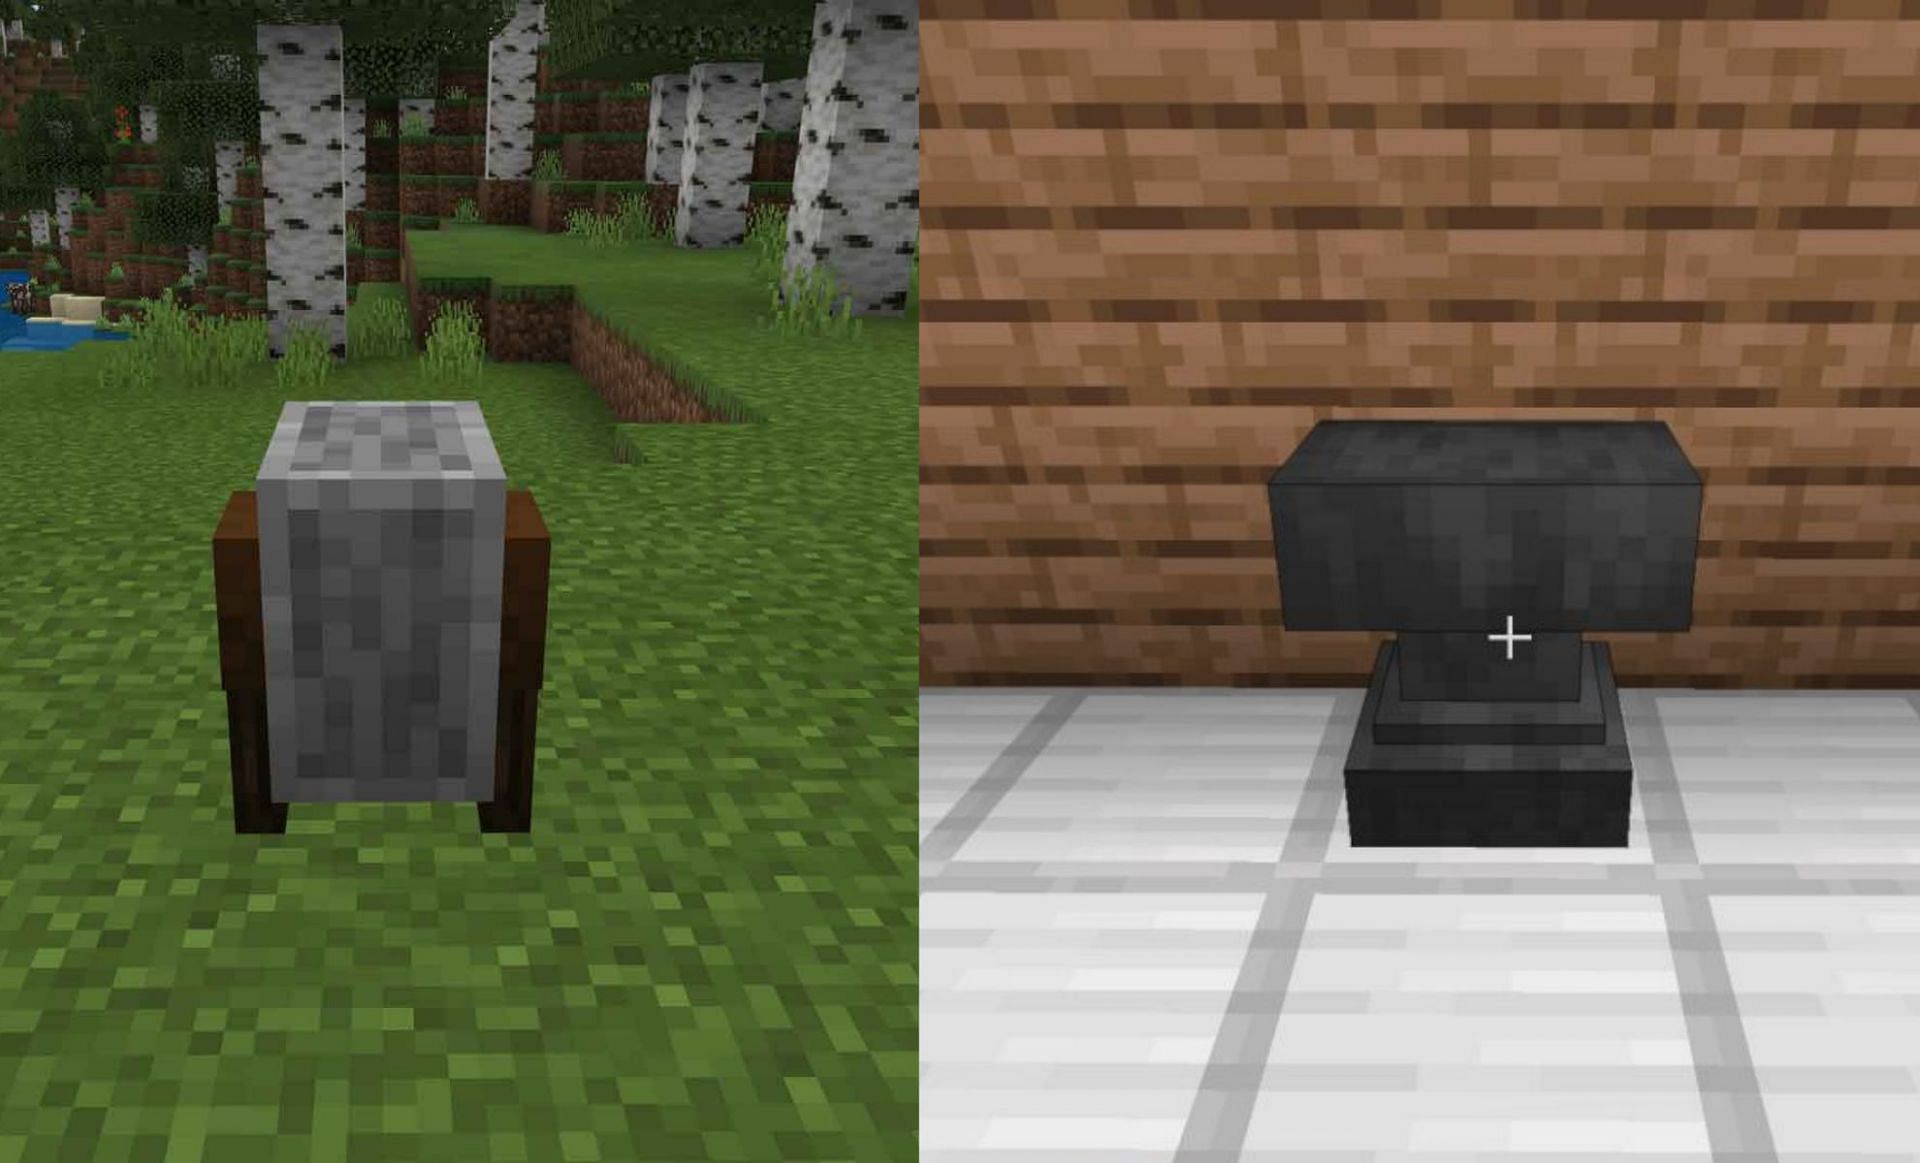 Which block is better? (Image via Mojang)